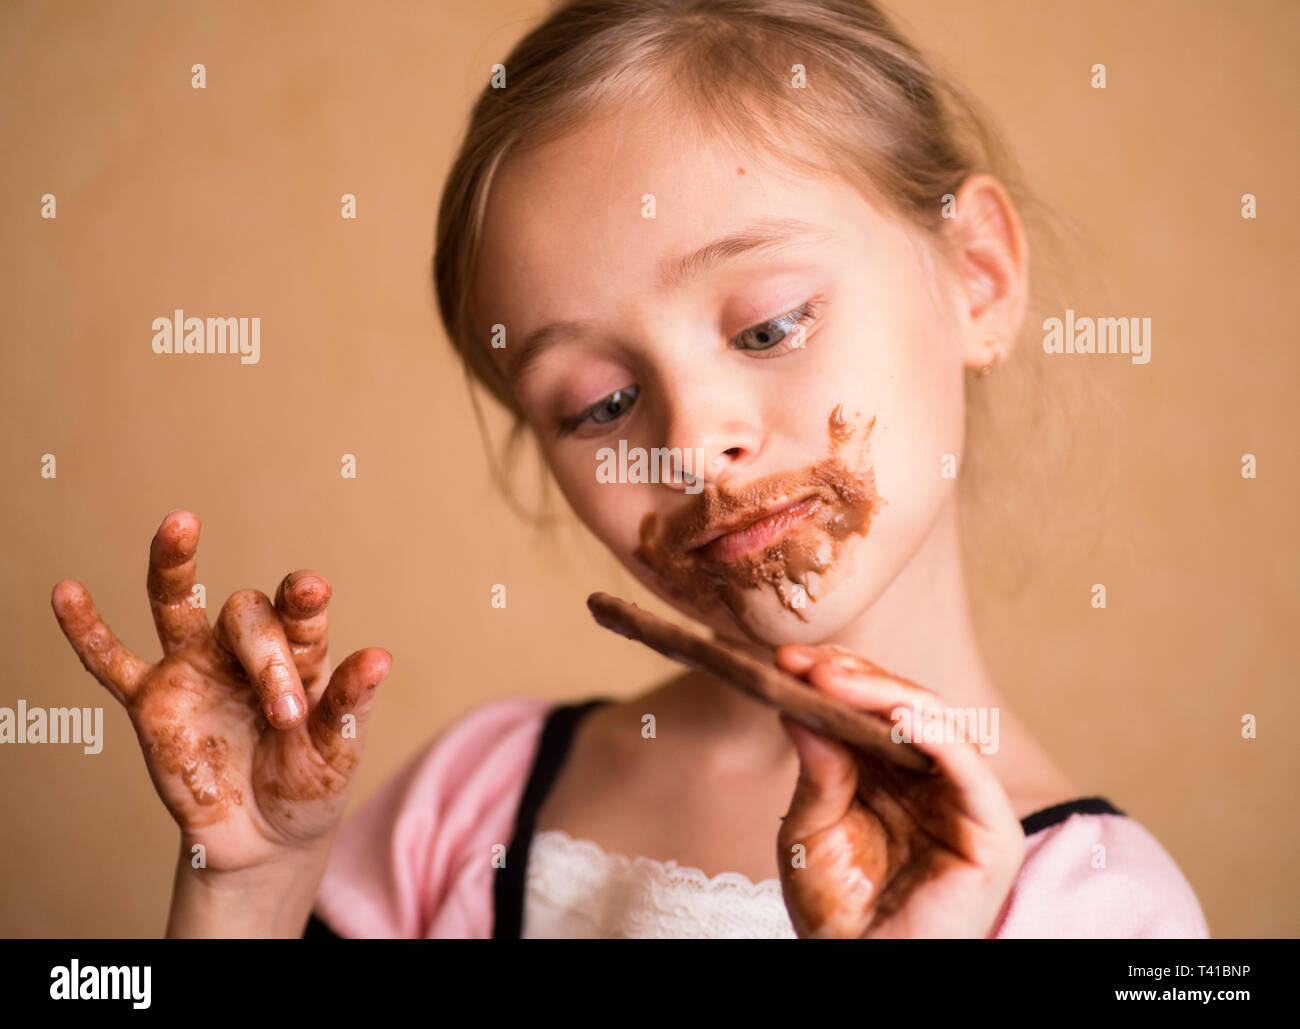 Girl with chocolate.Girls, children eat chocolate, a mouth and hands of girls are smeared with chocolate. Stock Photo